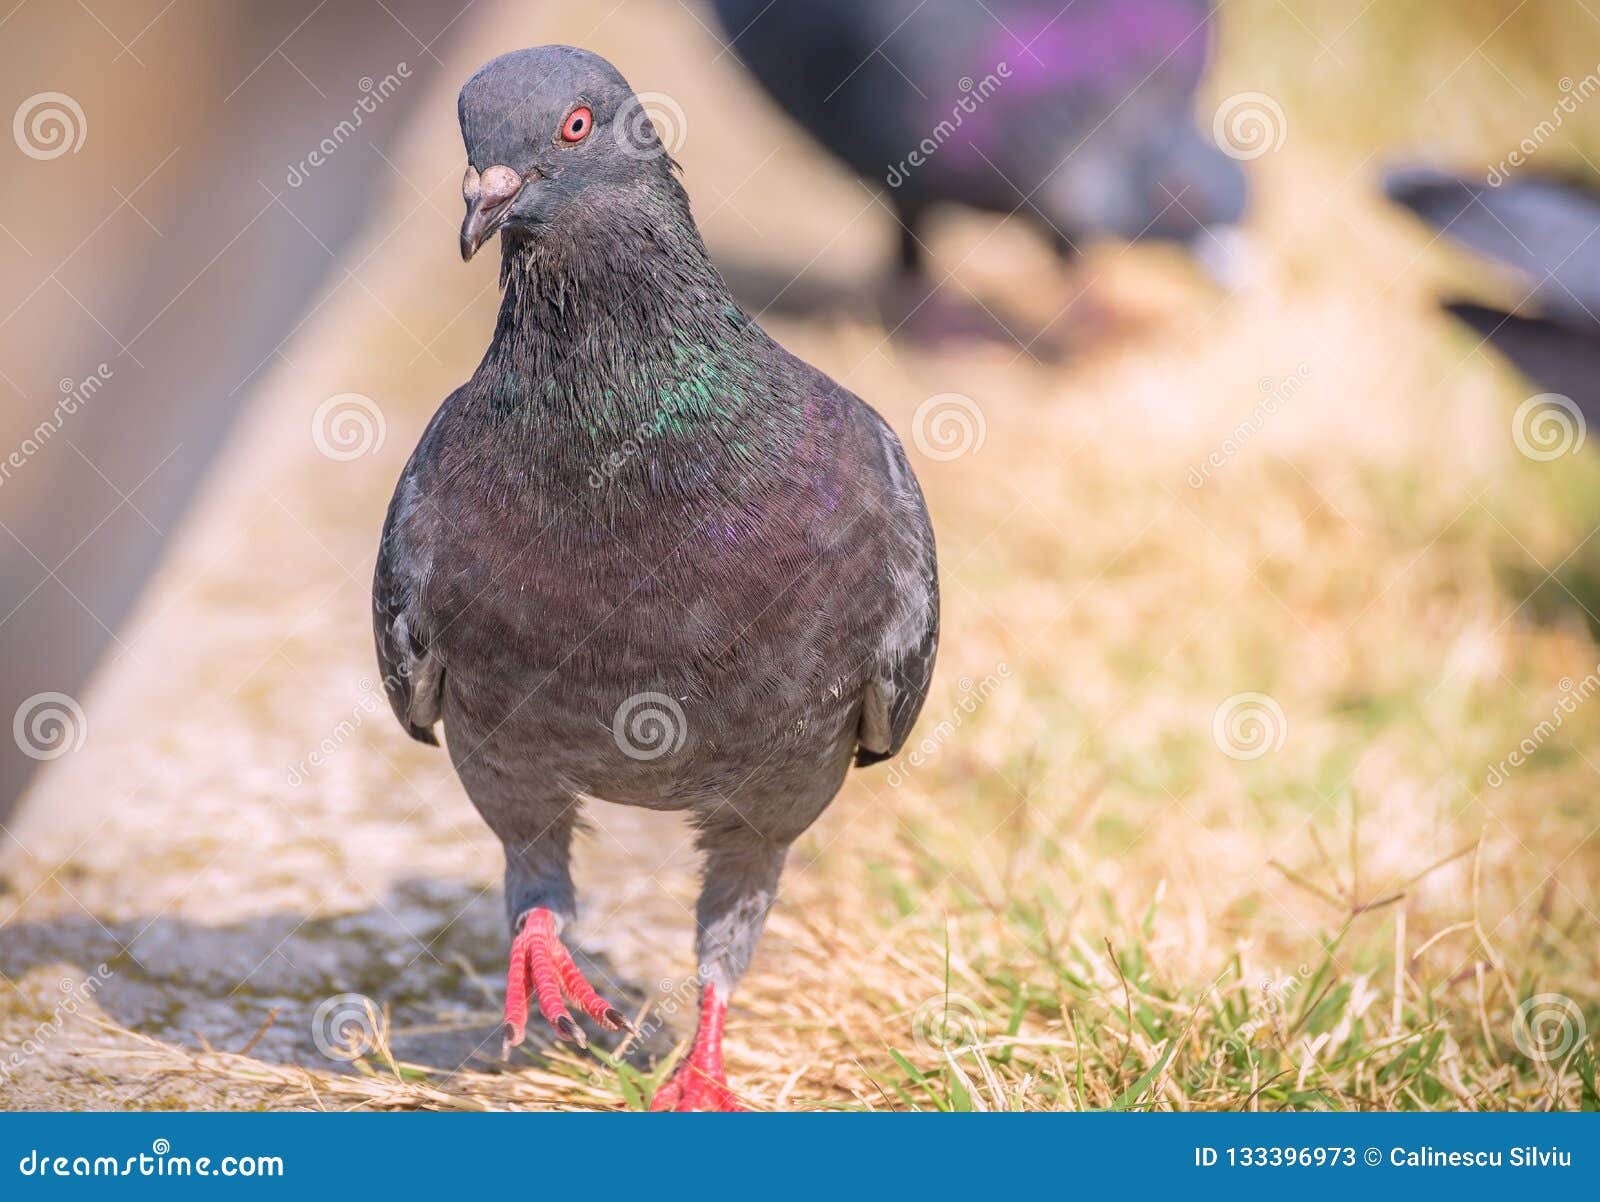 Pigeon Colored on the Grass Stock Image - Image of blur, bird: 133396973